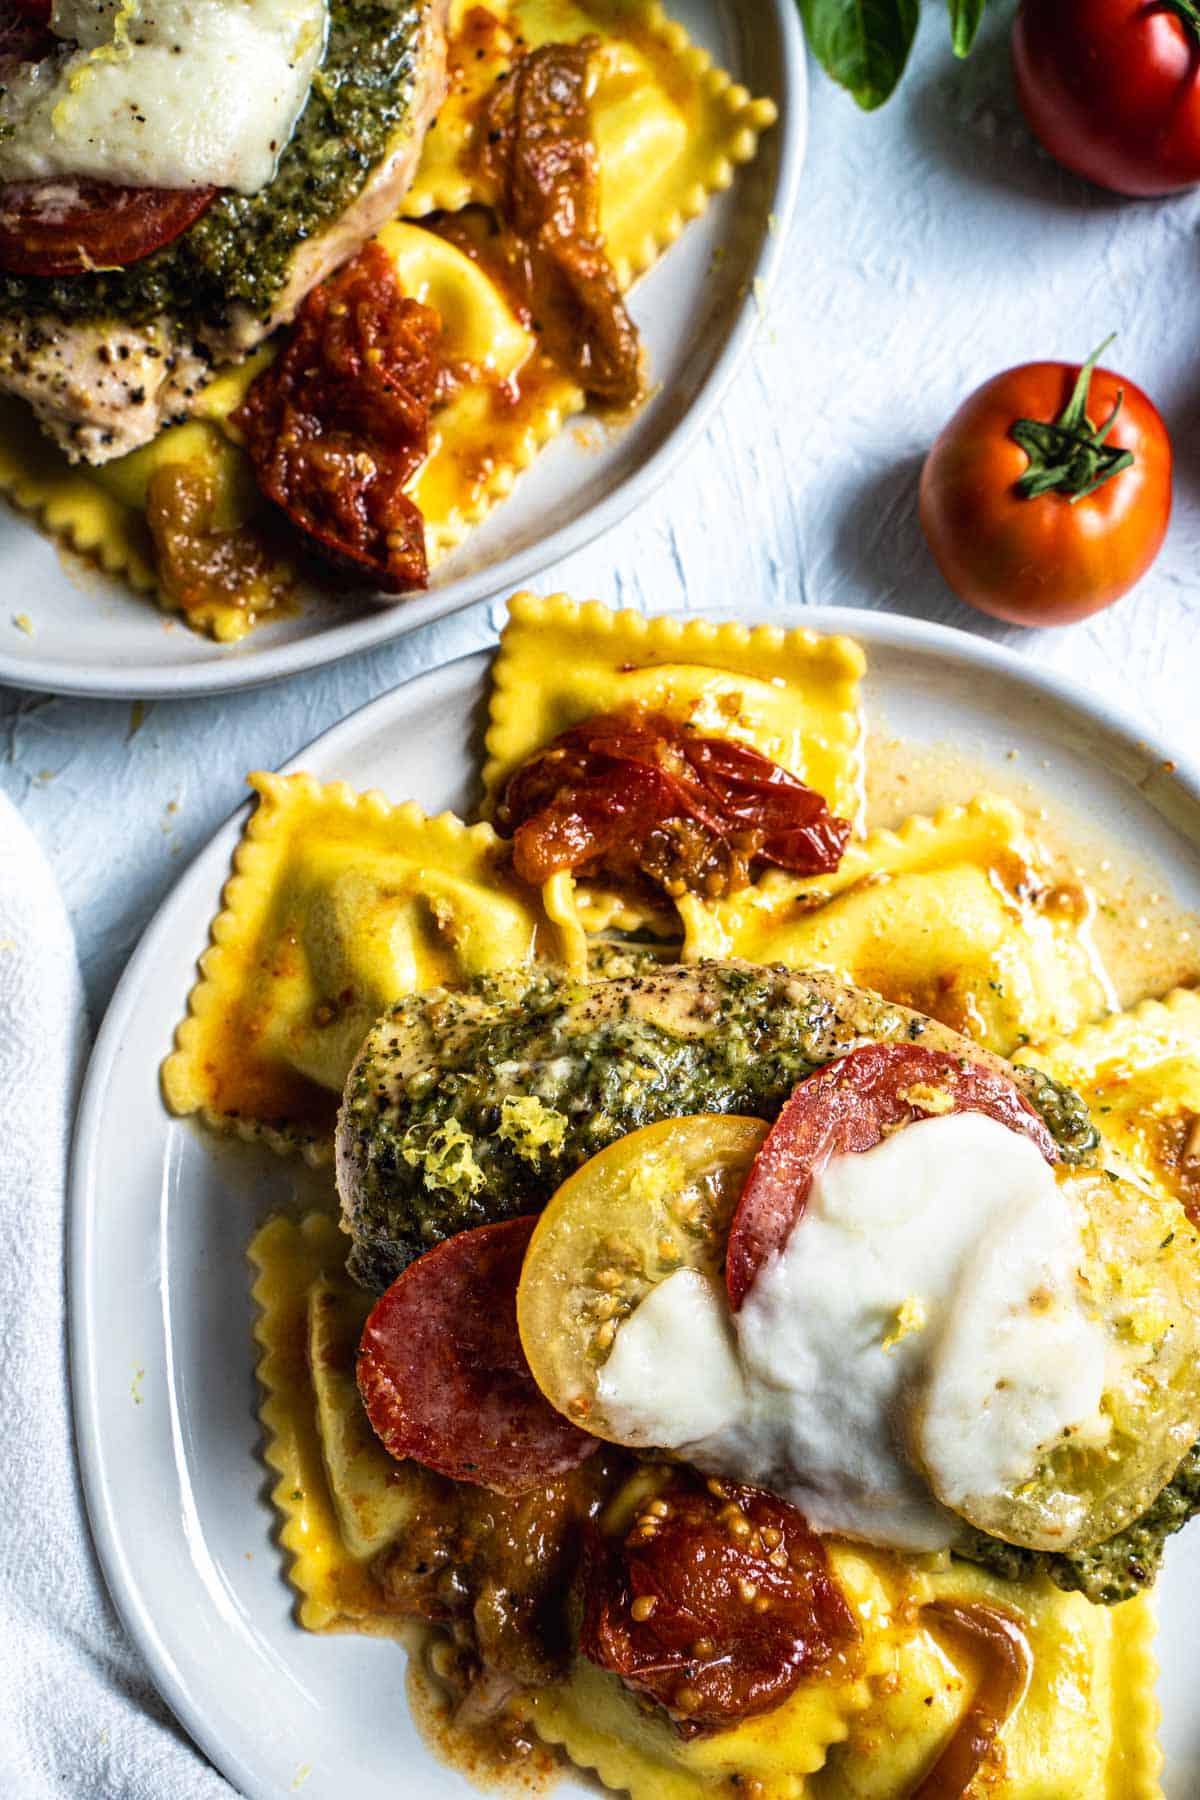 Baked pesto chicken breasts on a bed of ravioli with tomatoes and melted mozzeralla